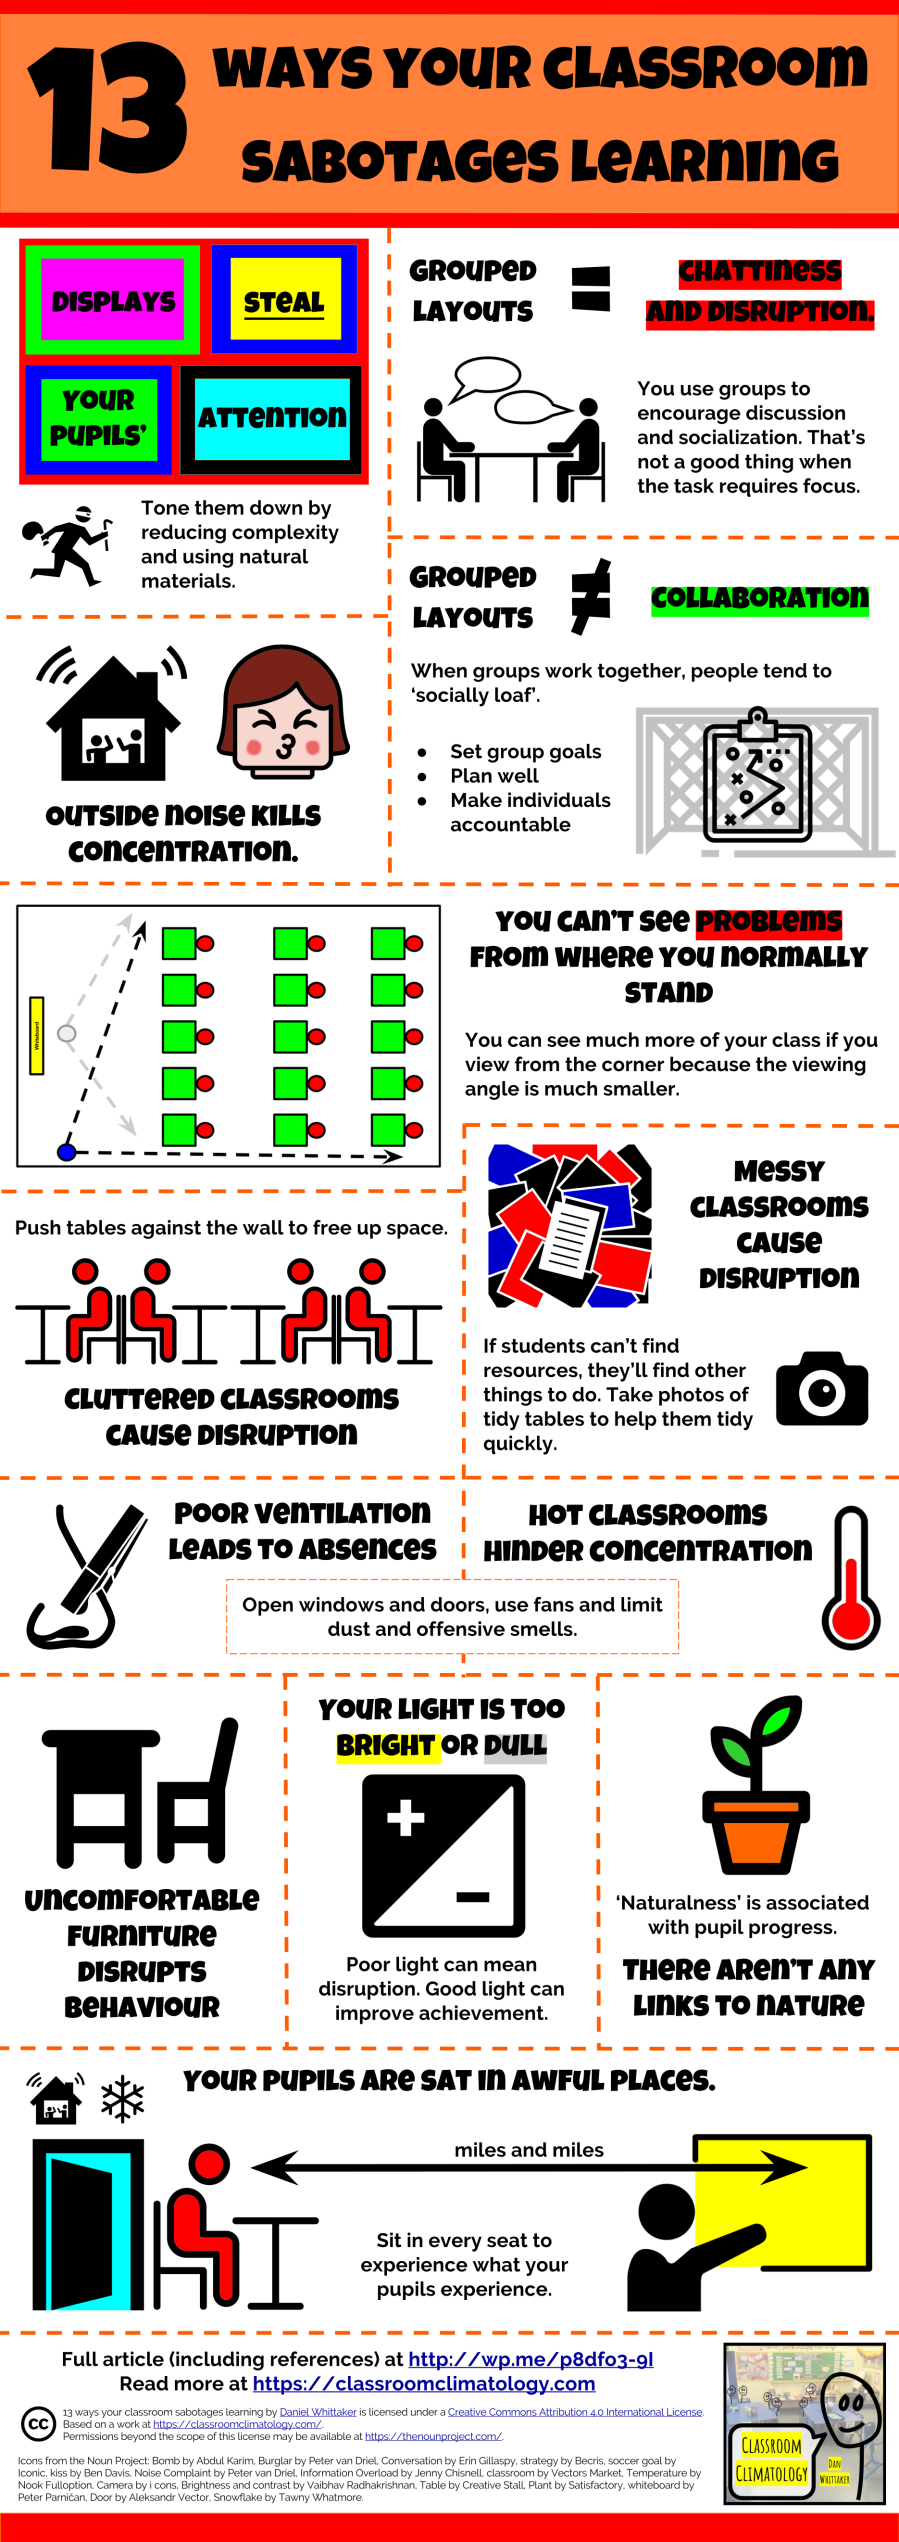 Infographic - 13 ways your classroom sabotages learning